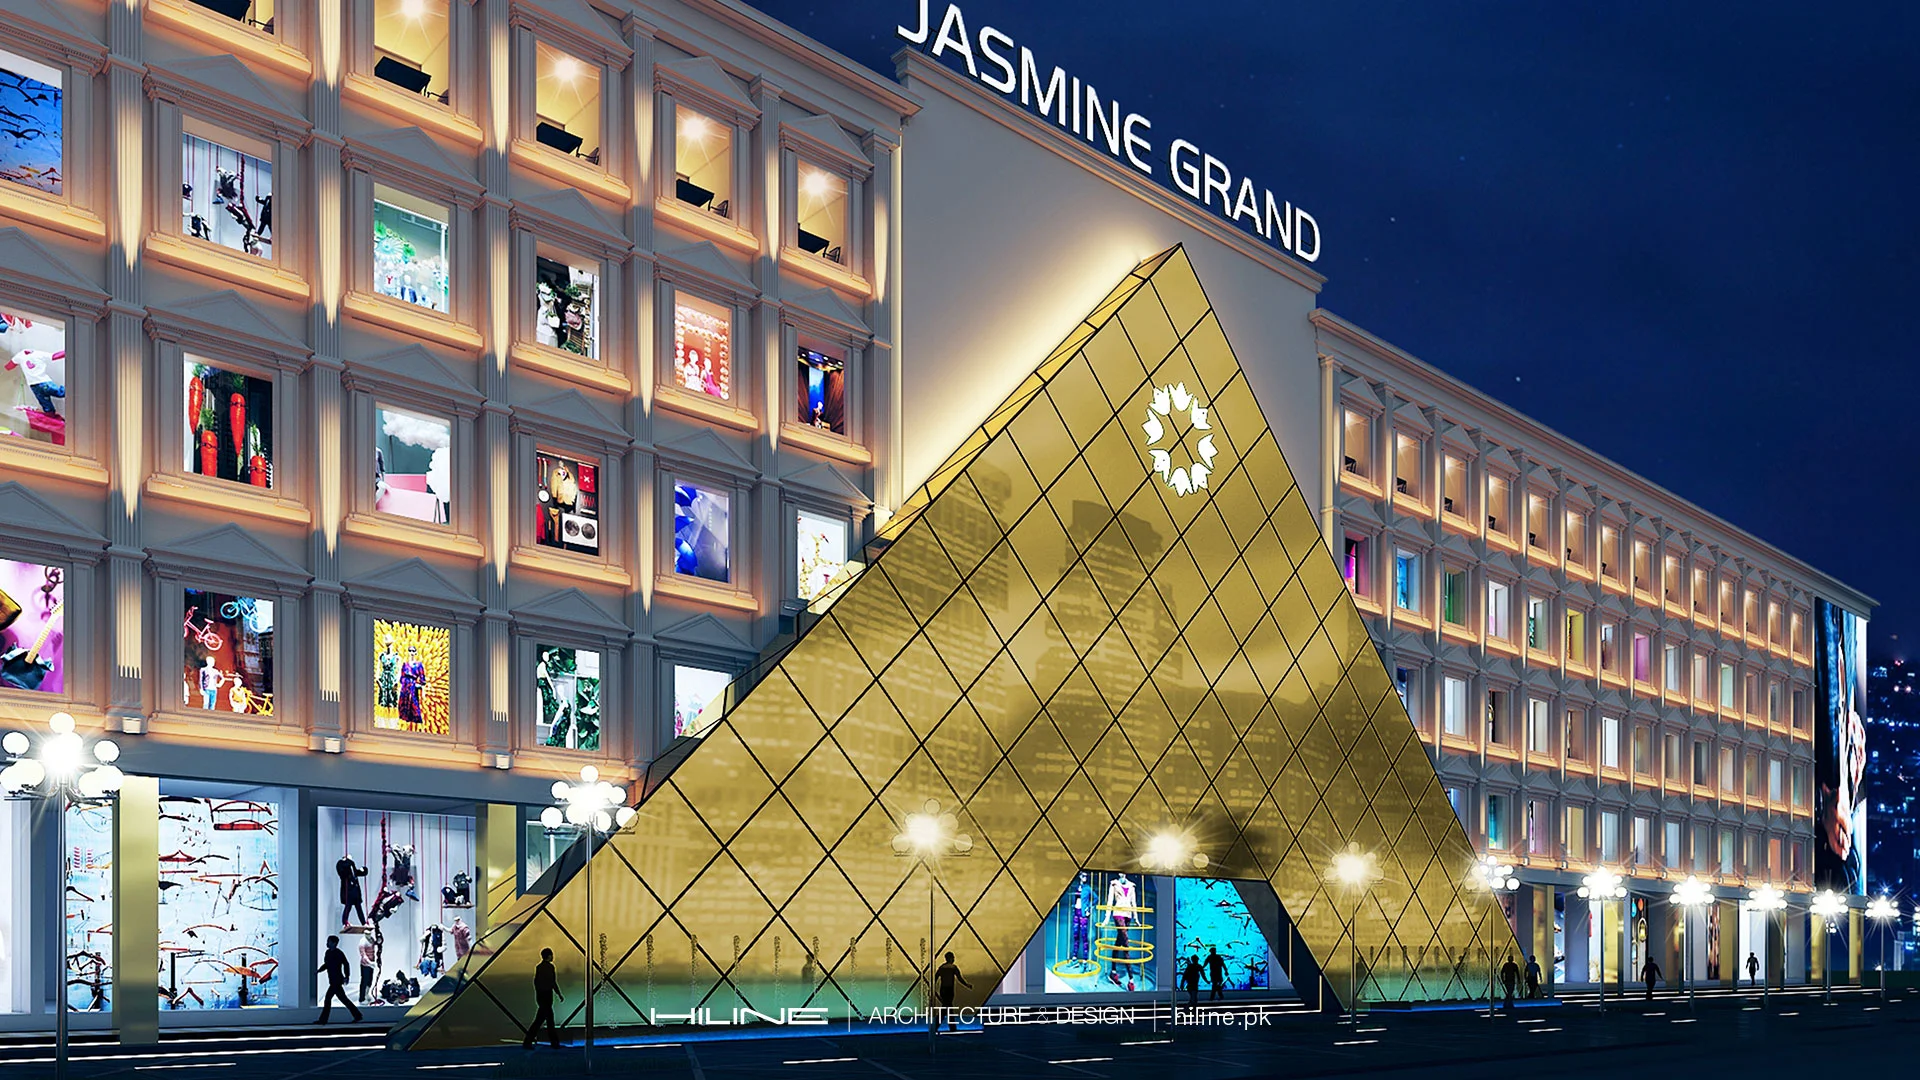 Jasmine-Grand-Mall-by-hiline-architects-interior-designer-3d-visualization-restaurant-commercial-building-design-Lahore-04